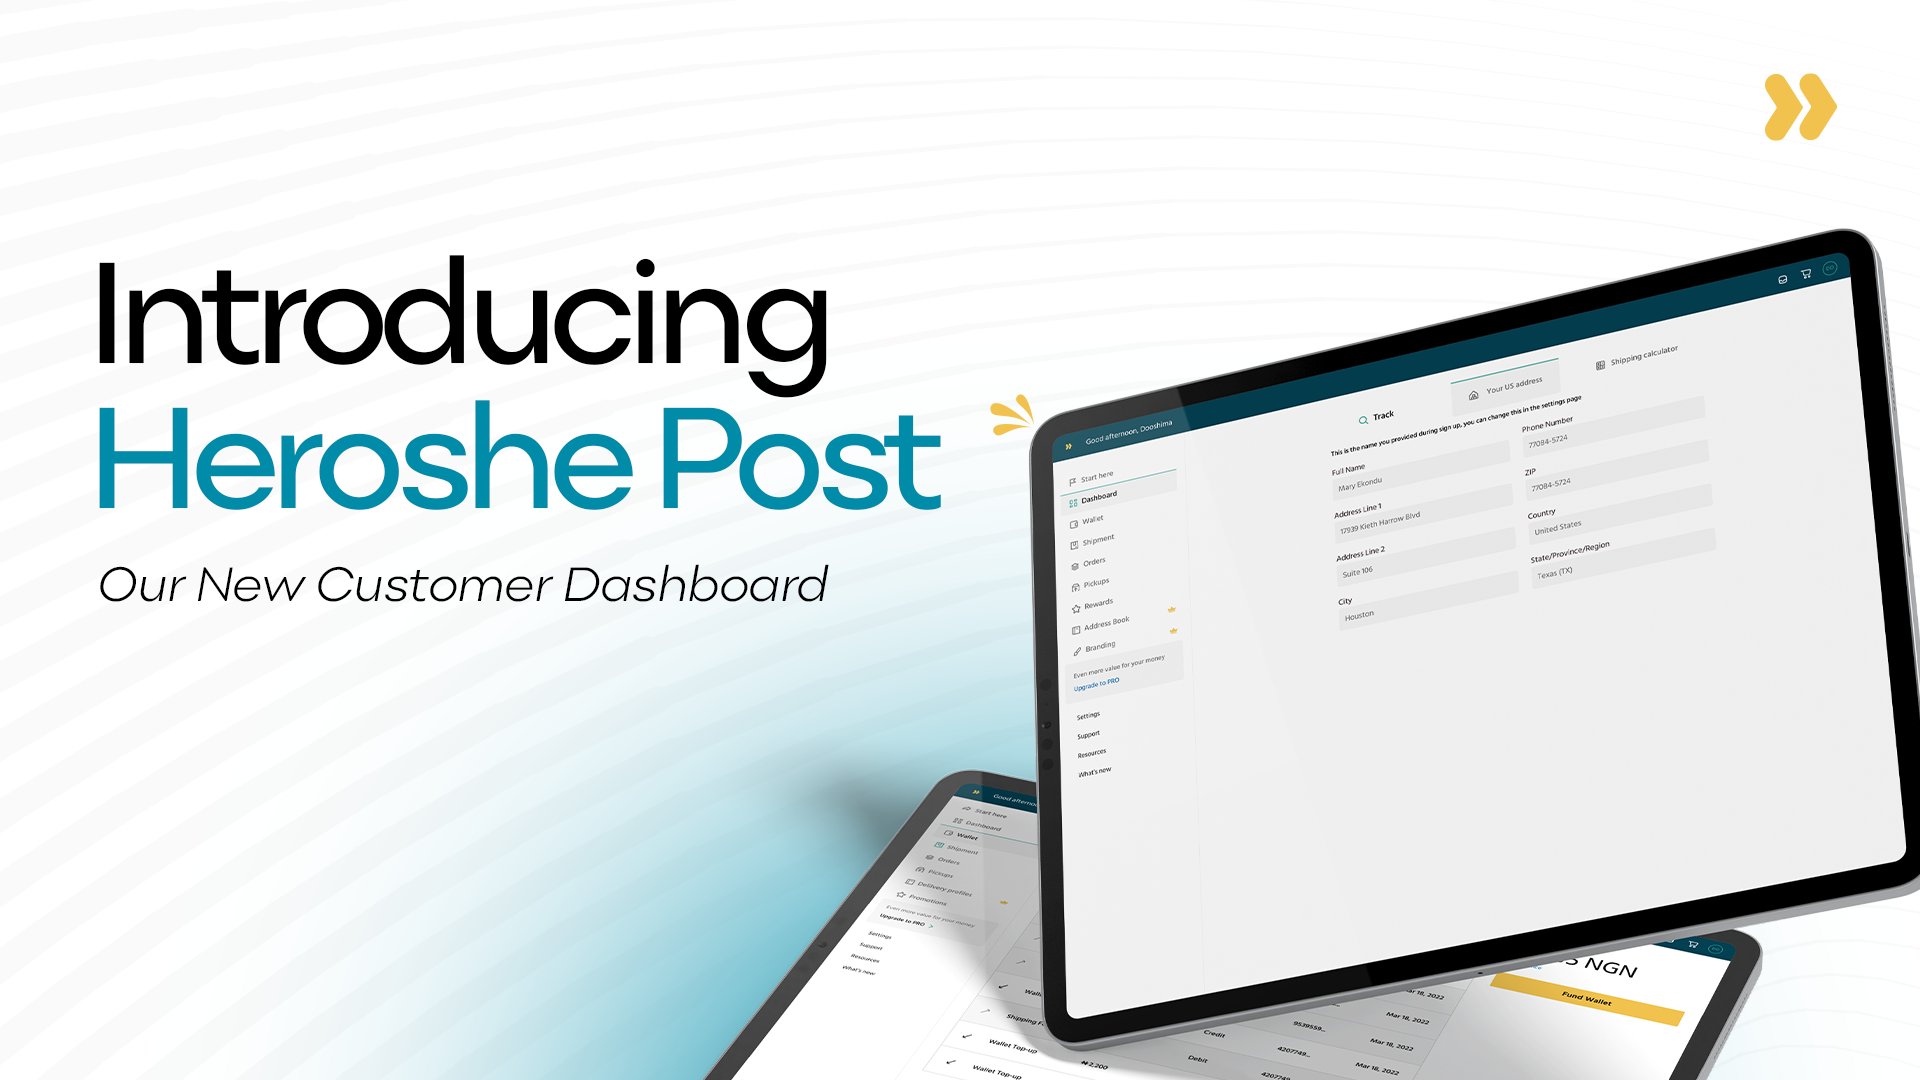 Introducing Heroshe Post - Our New Customer Dashboard